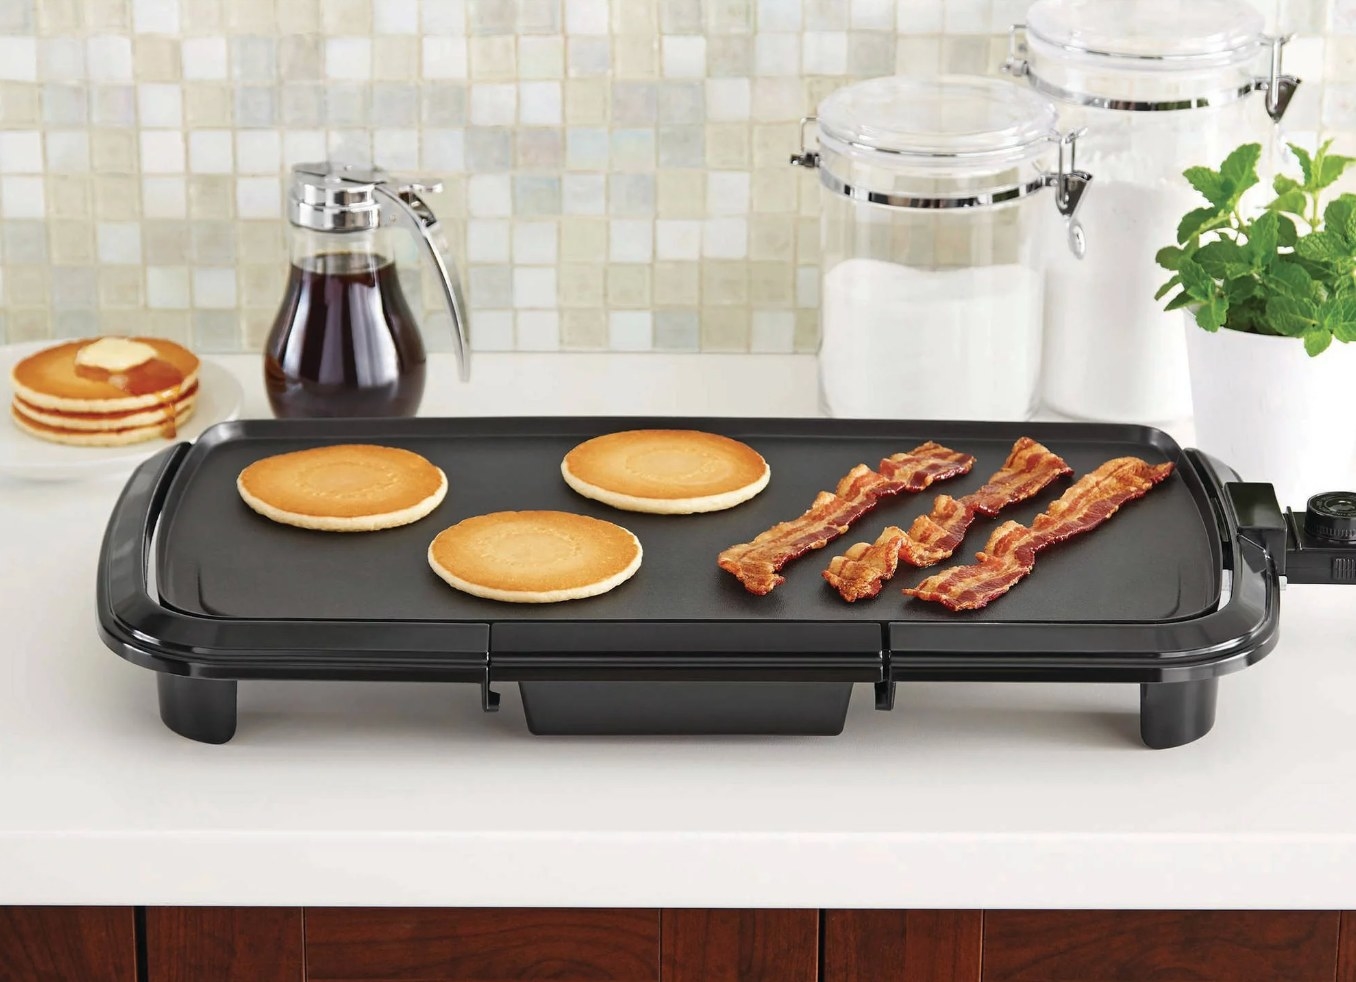 the black griddle with pancakes and bacon on a decorated kitchen counter